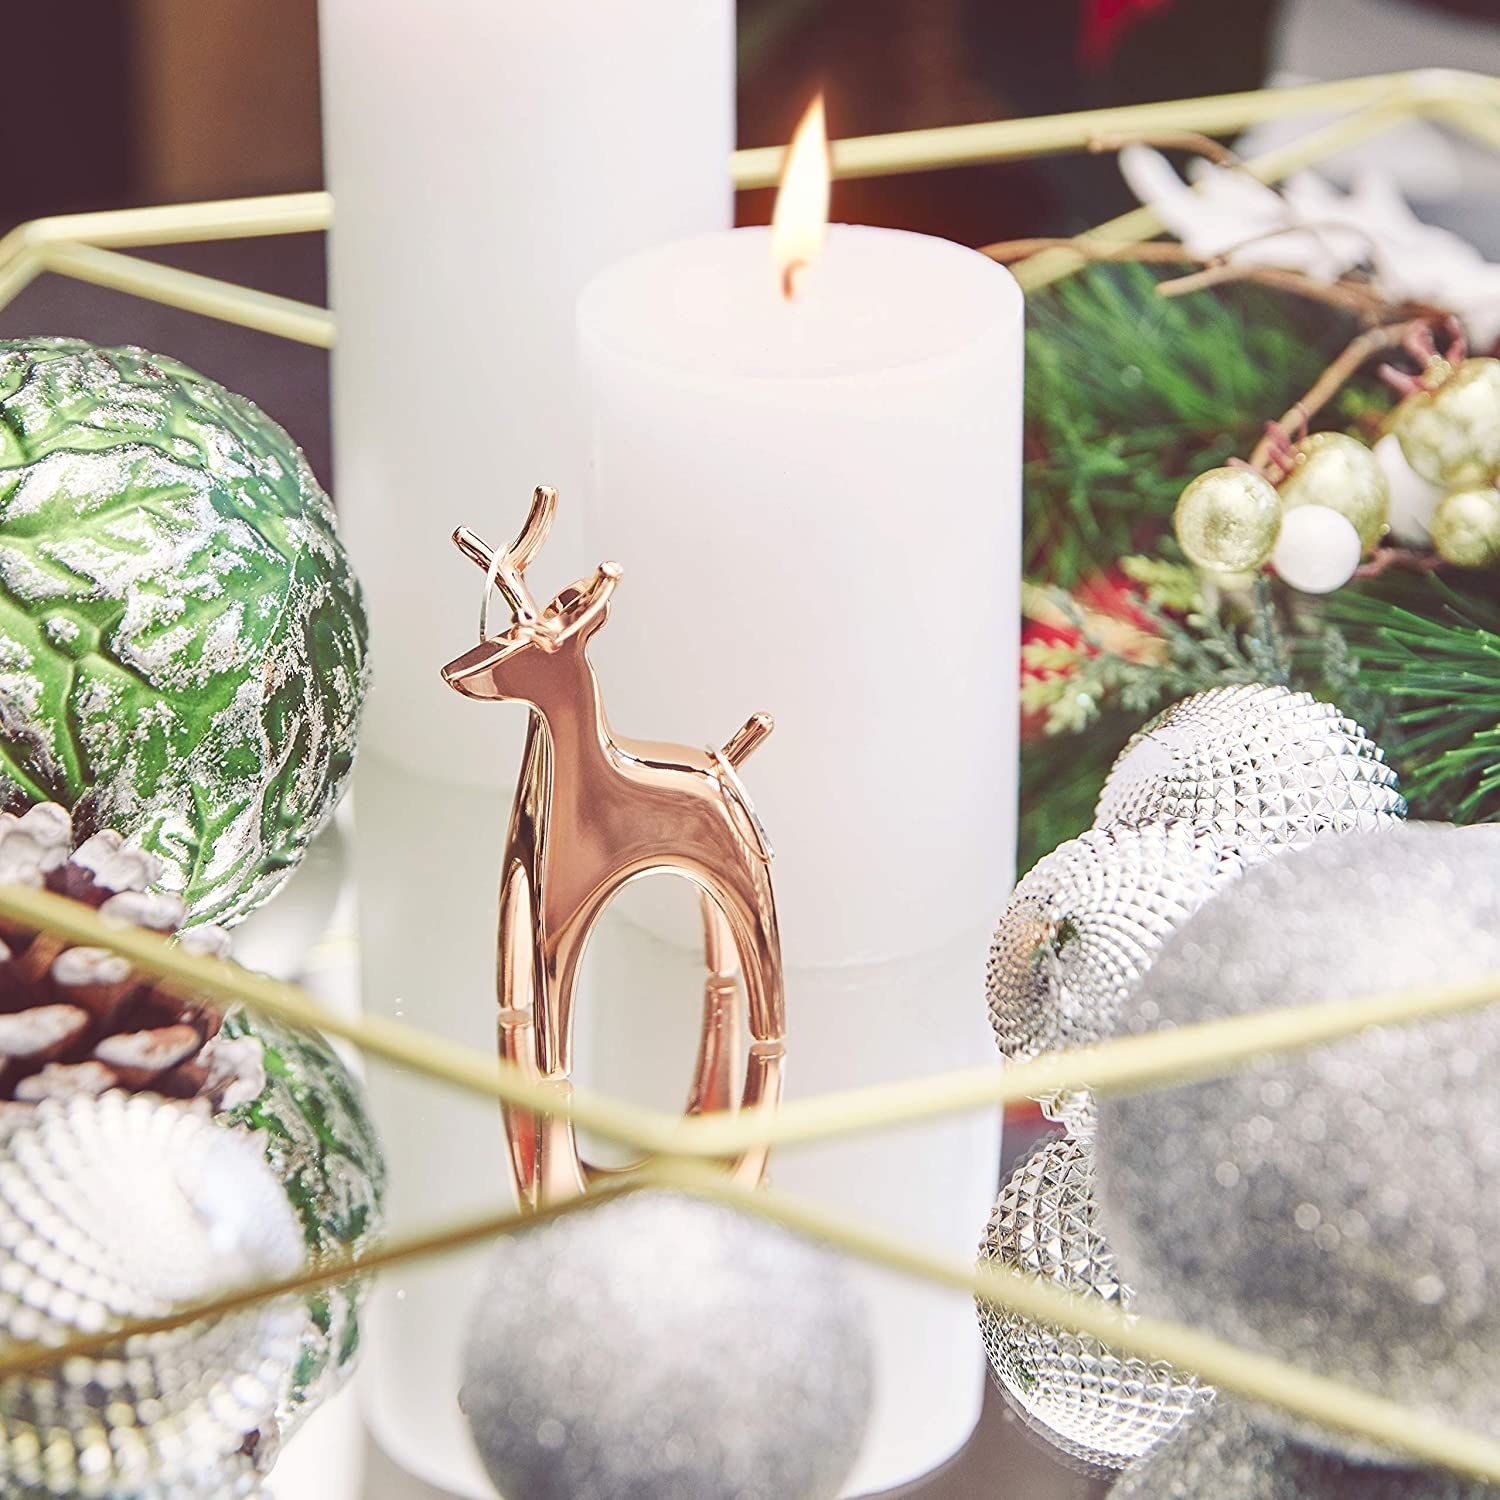 The reindeer ring holder surrounded by ornaments